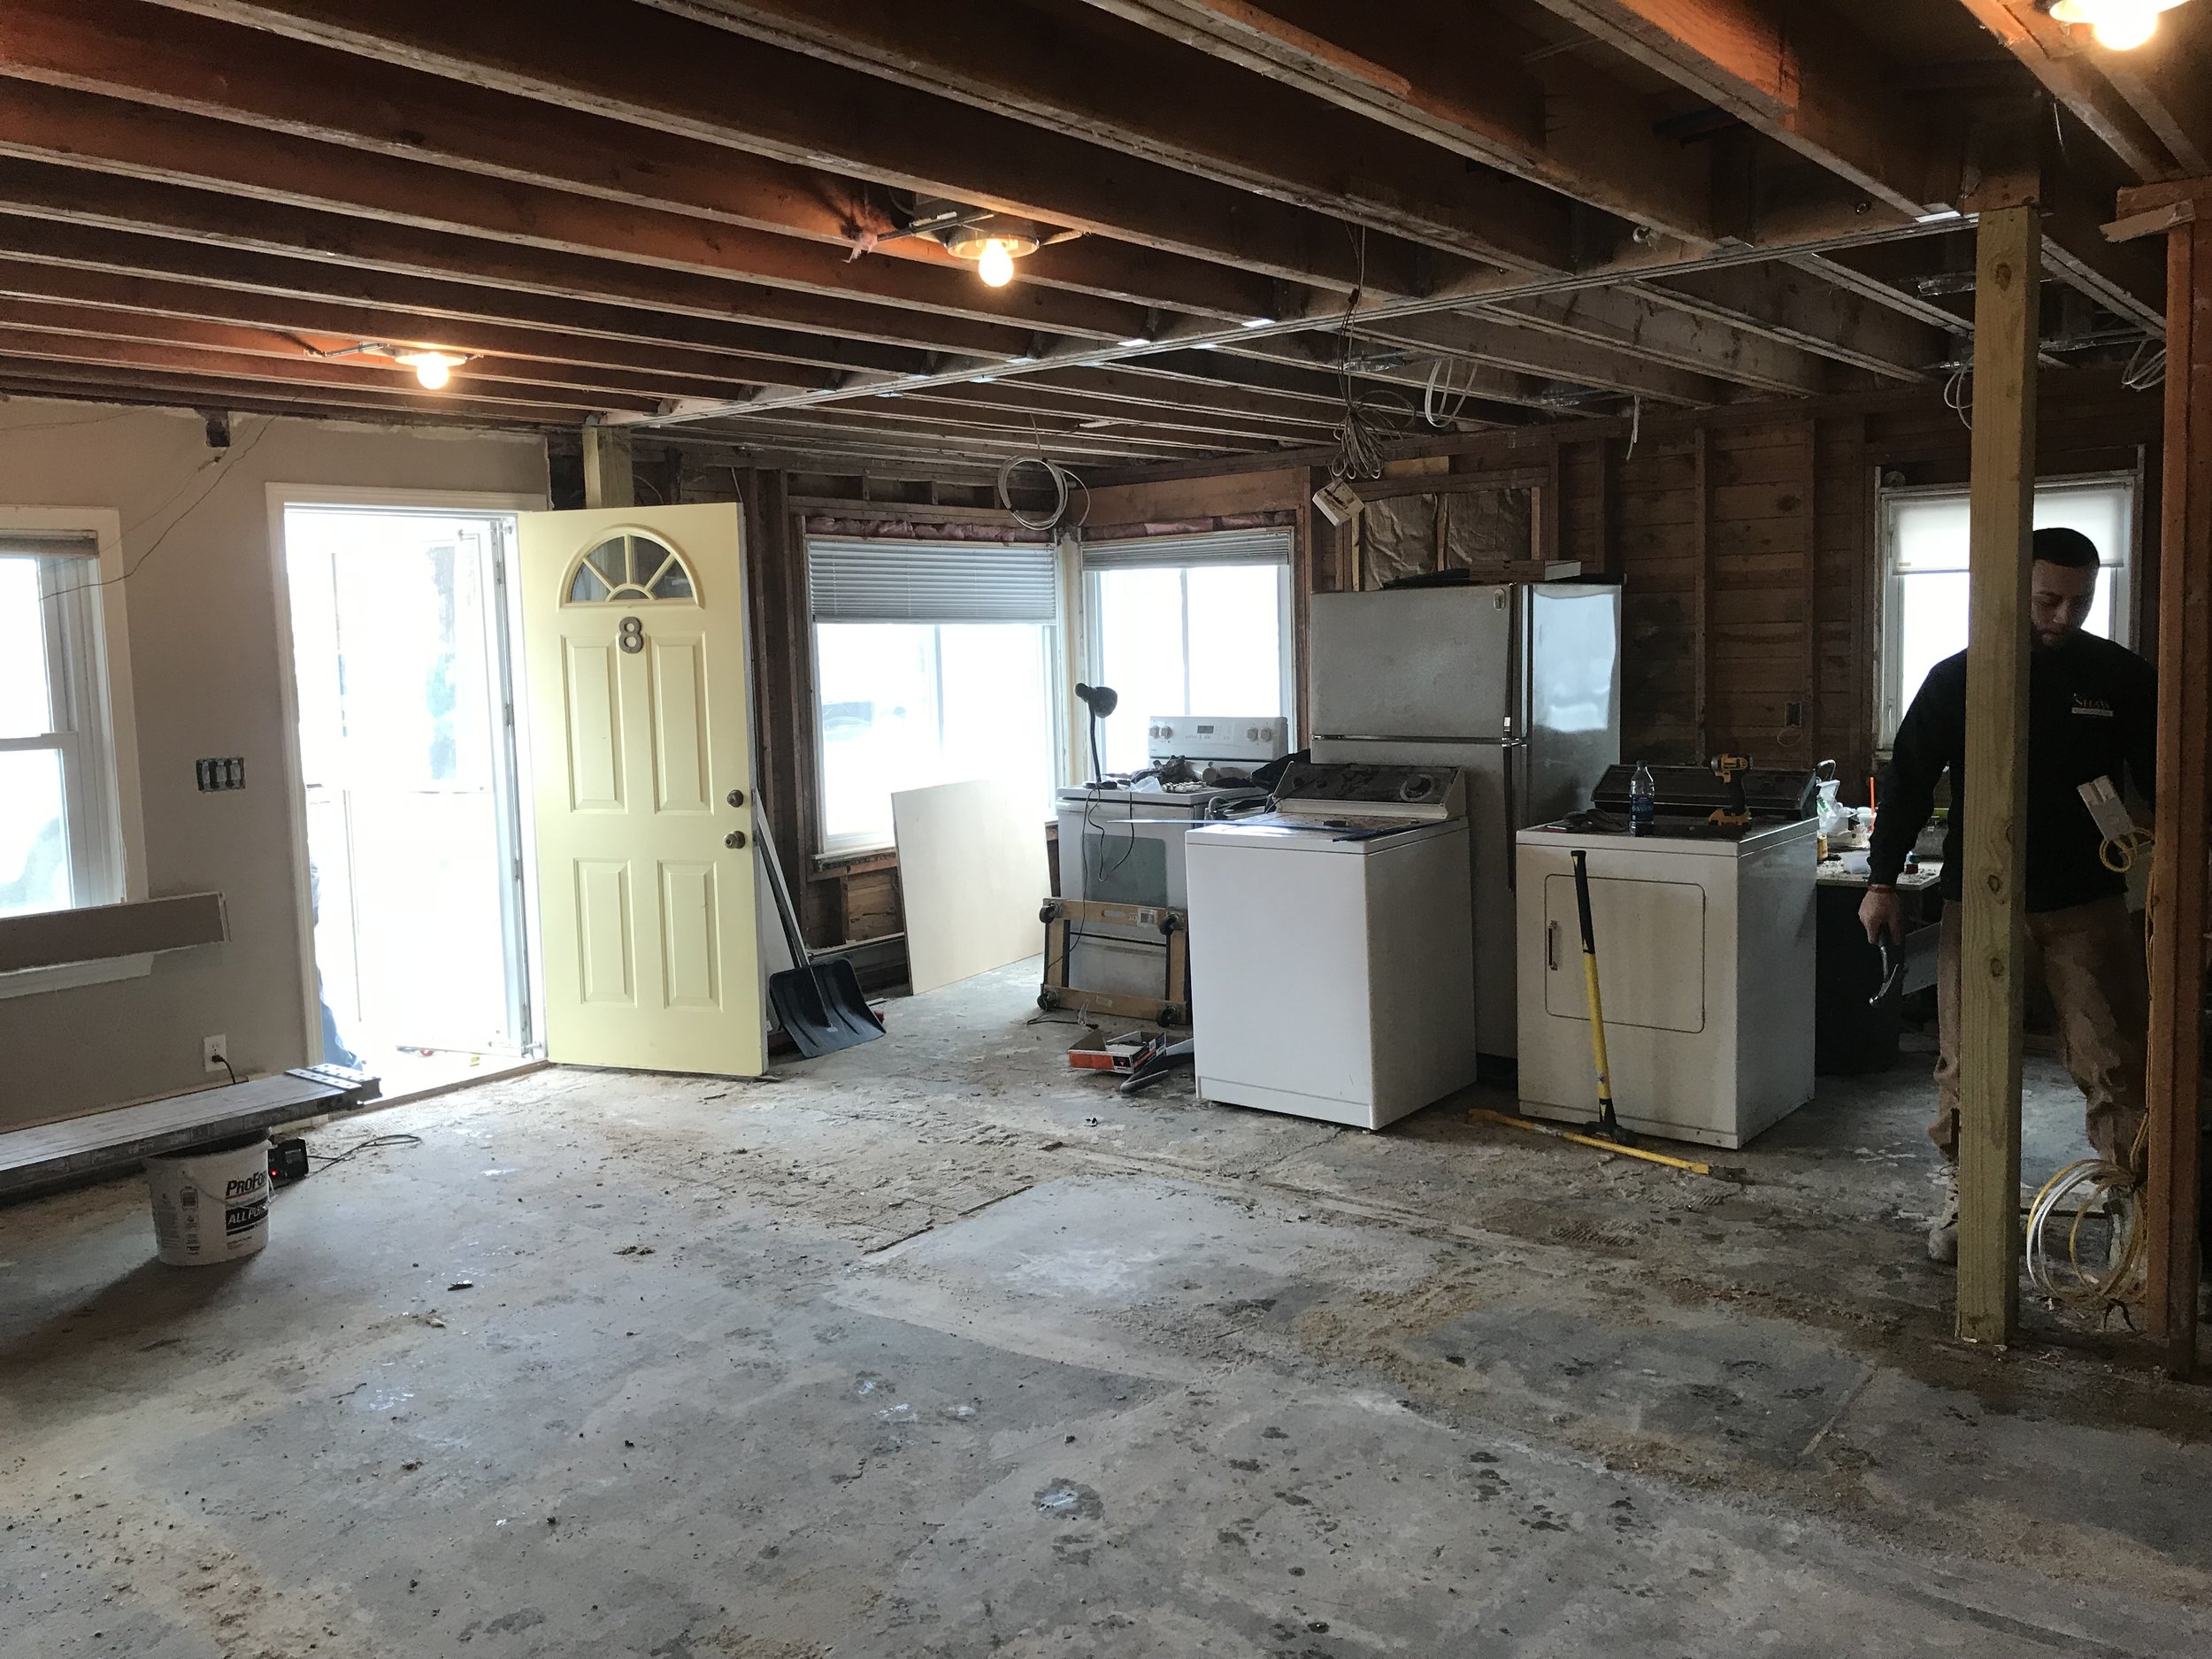  This first floor remodel includes kitchen, living room, and bathroom renovations. The overall project includes demo, framing, installing new insulation, drywall, priming/painting, installing new floors and doors, brand new cabinets and countertops, 